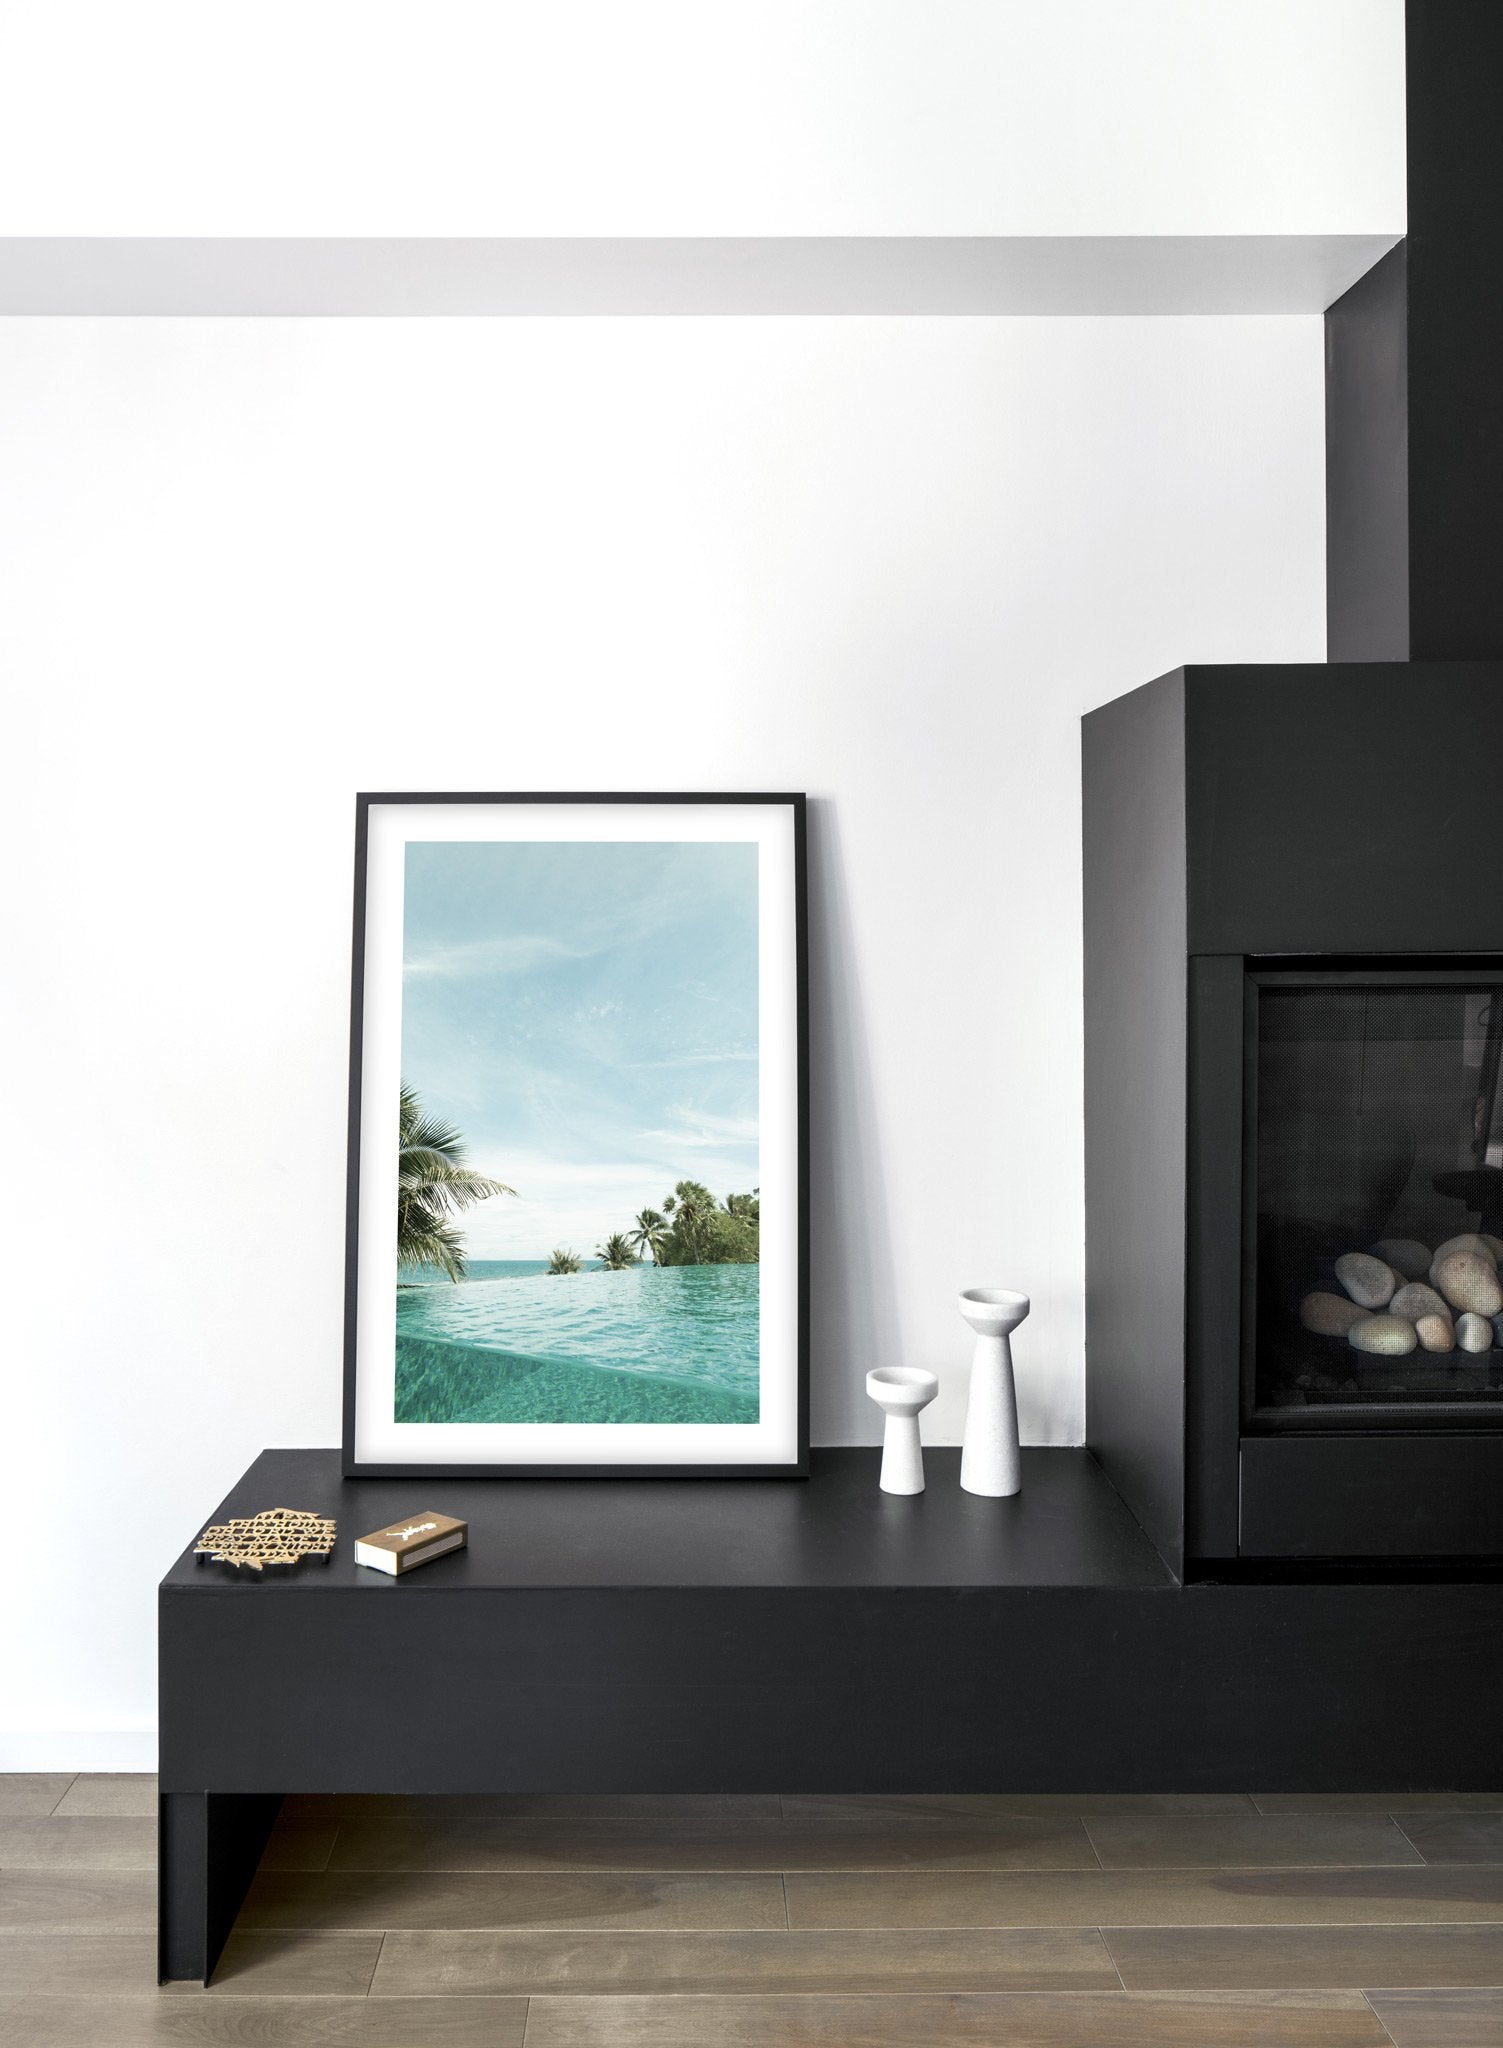 Turquoise Sea modern minimalist photography poster by Opposite Wall - Living room - Fireplace